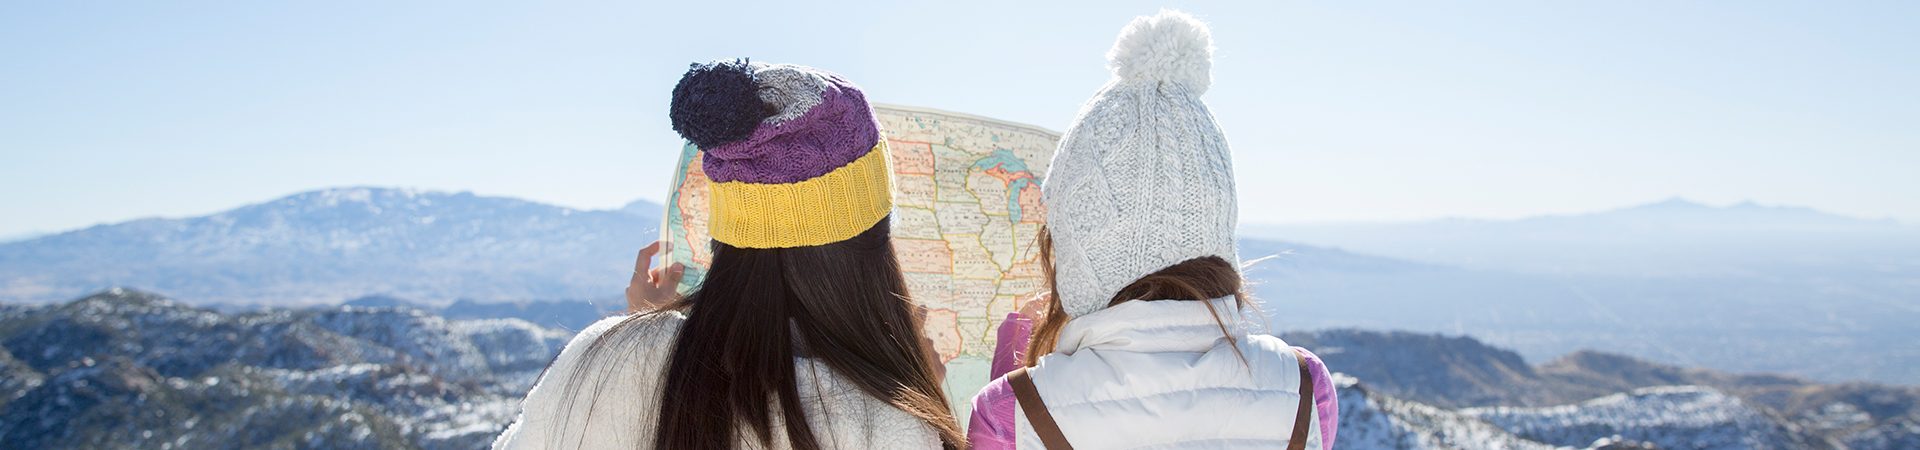 girl scouts looking at a map at a summit